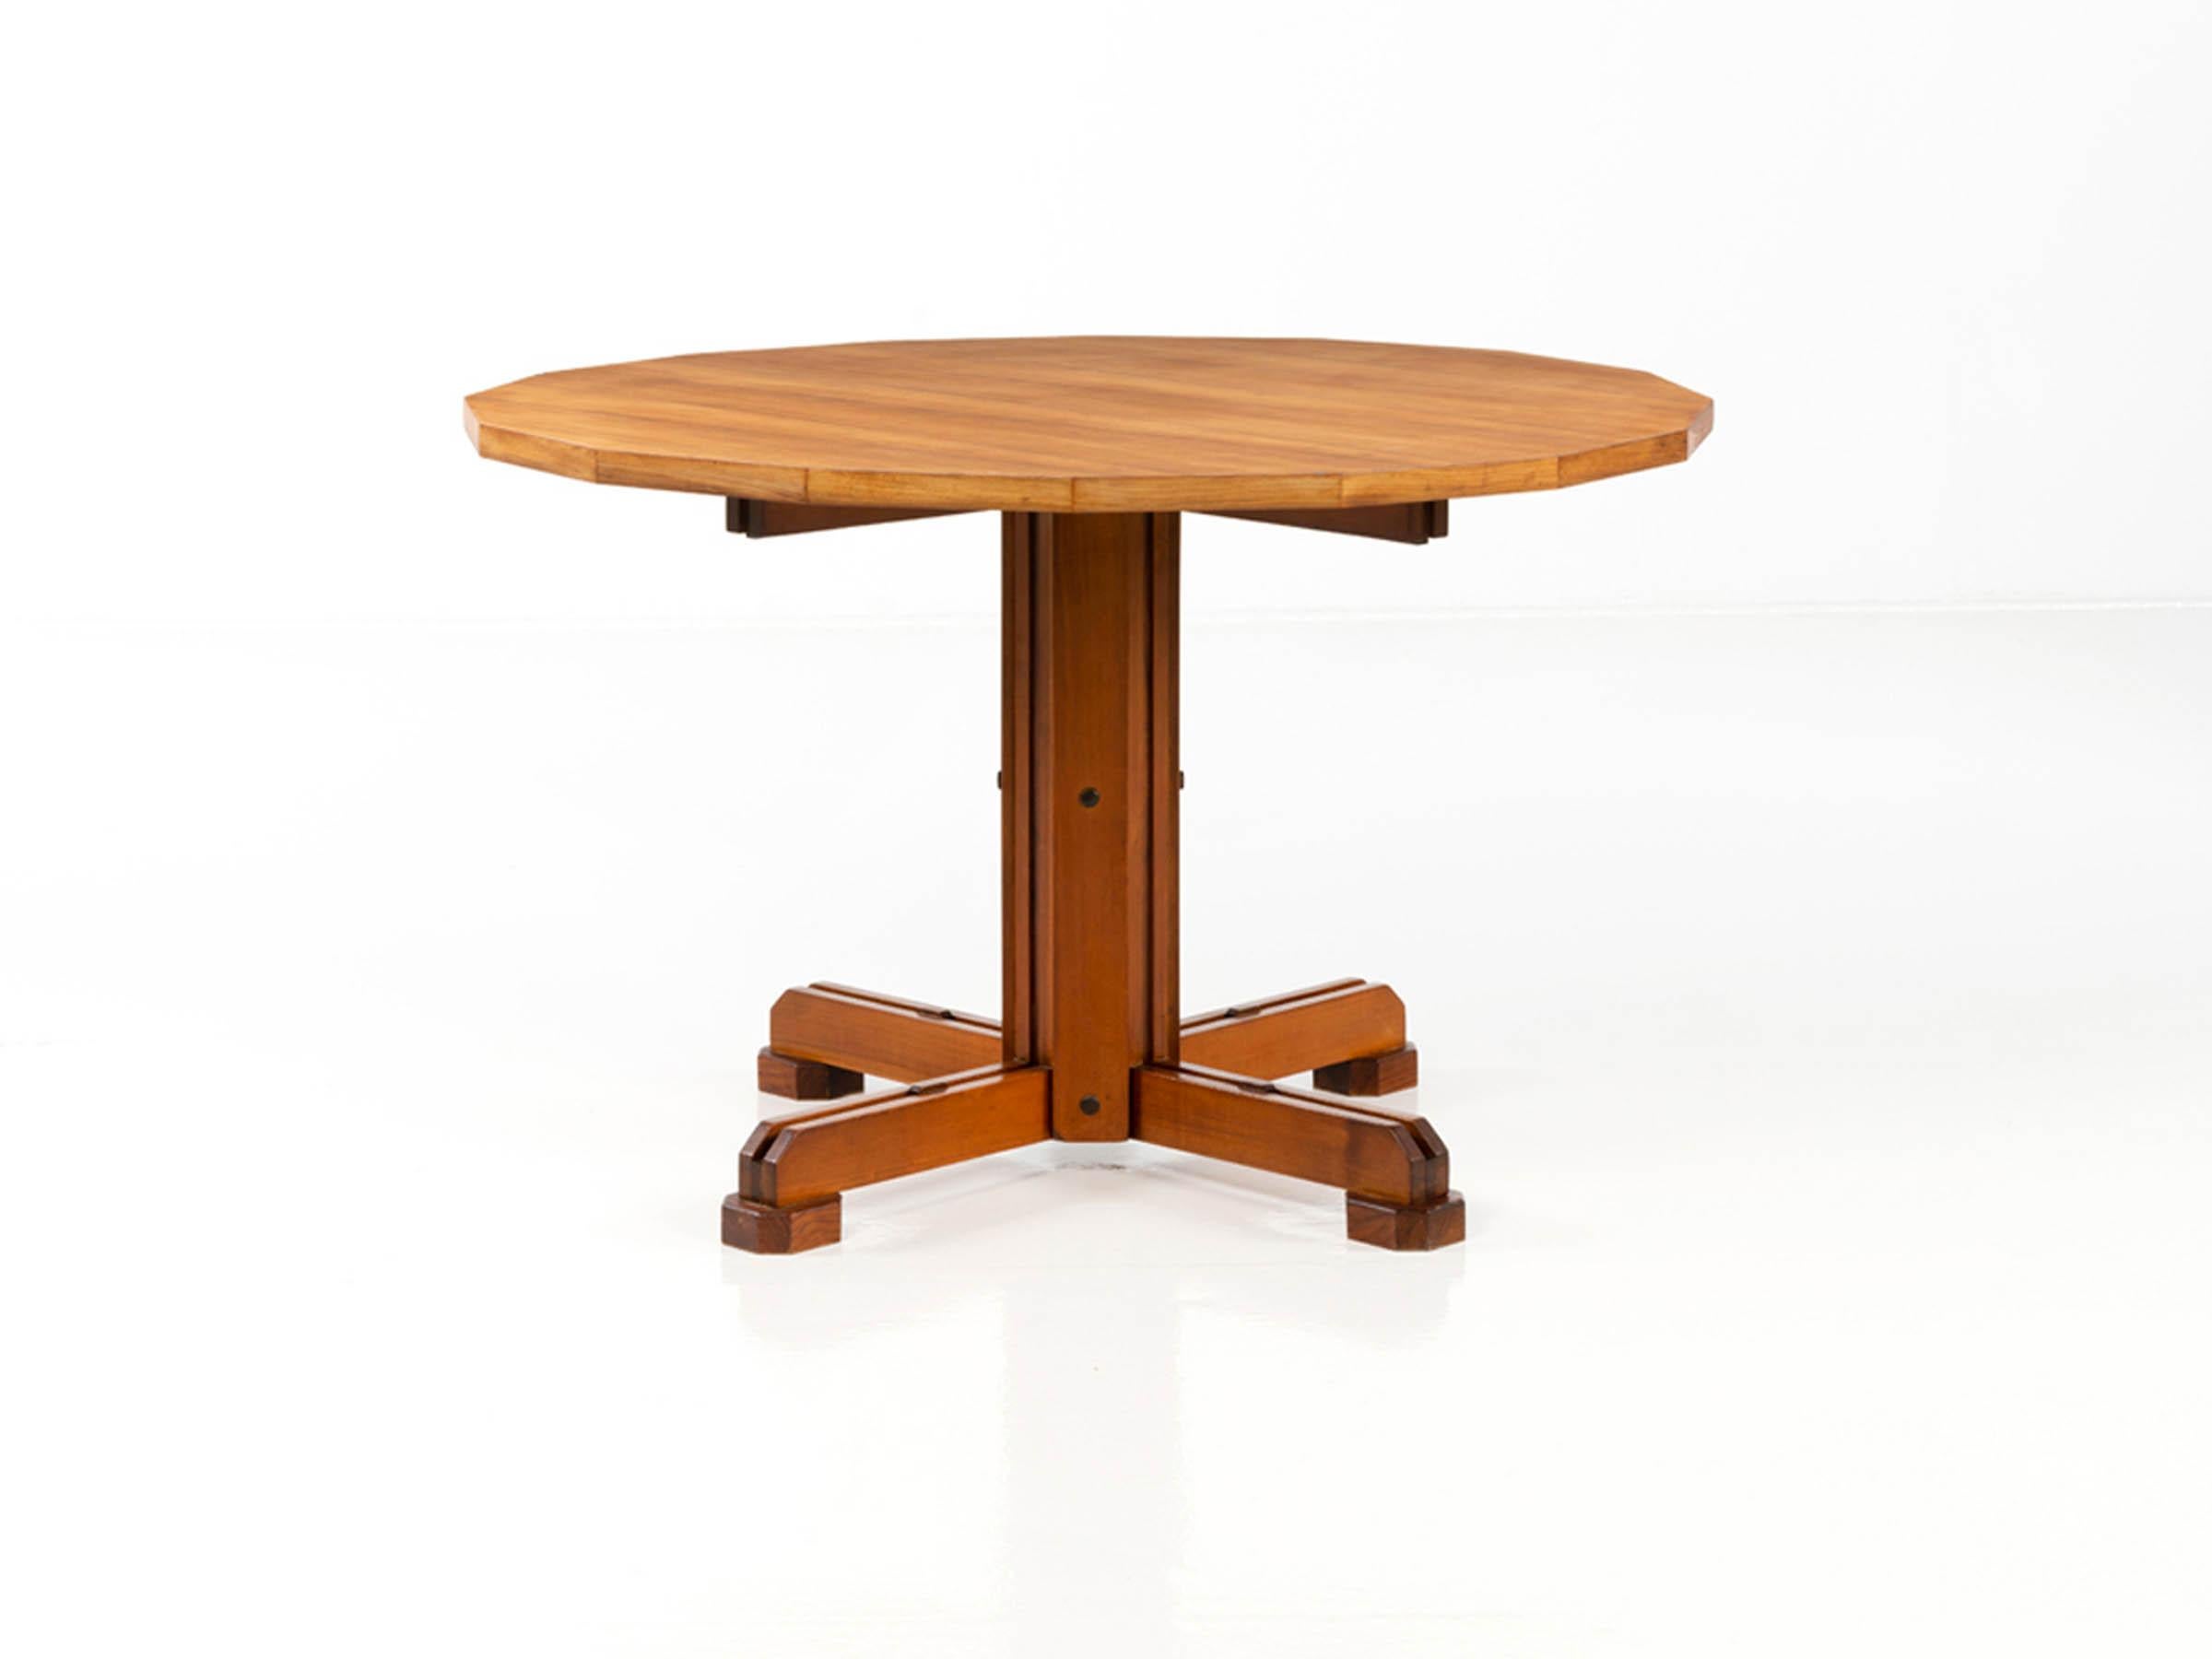 Table designed by Ico Parisi for a Como Family in 1959 and made by Brugnoli Mobili Cantù in a unique piece known by Archive Parisi.
With authentication by 